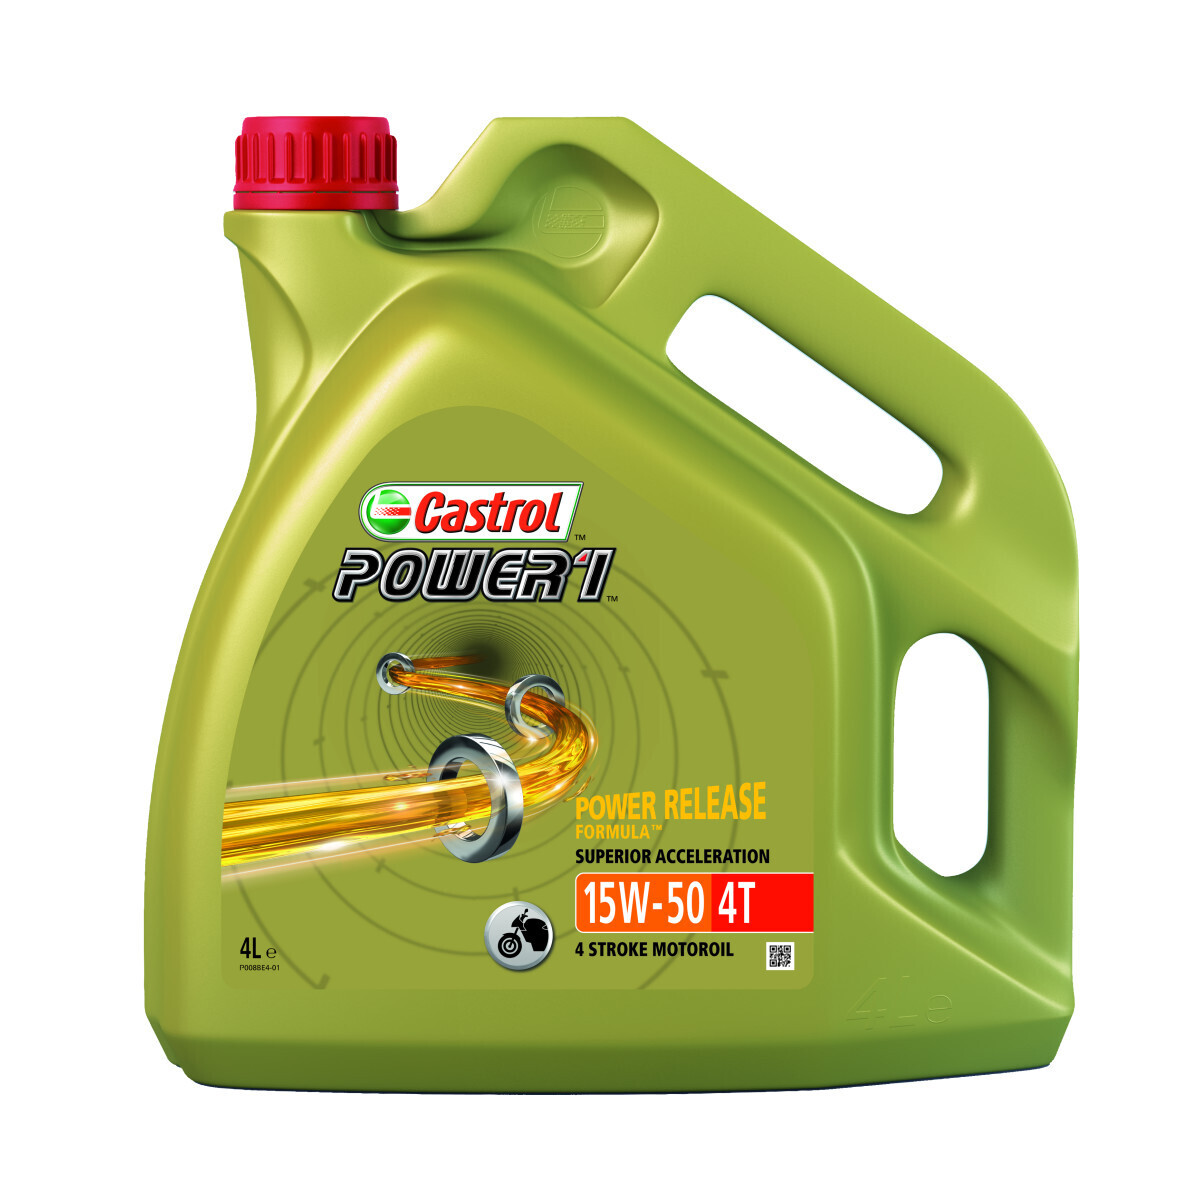 CASTROL
POWER 1 4-STROKE SAE 15W50 PARTLY SYNTHETIC 4 LITER